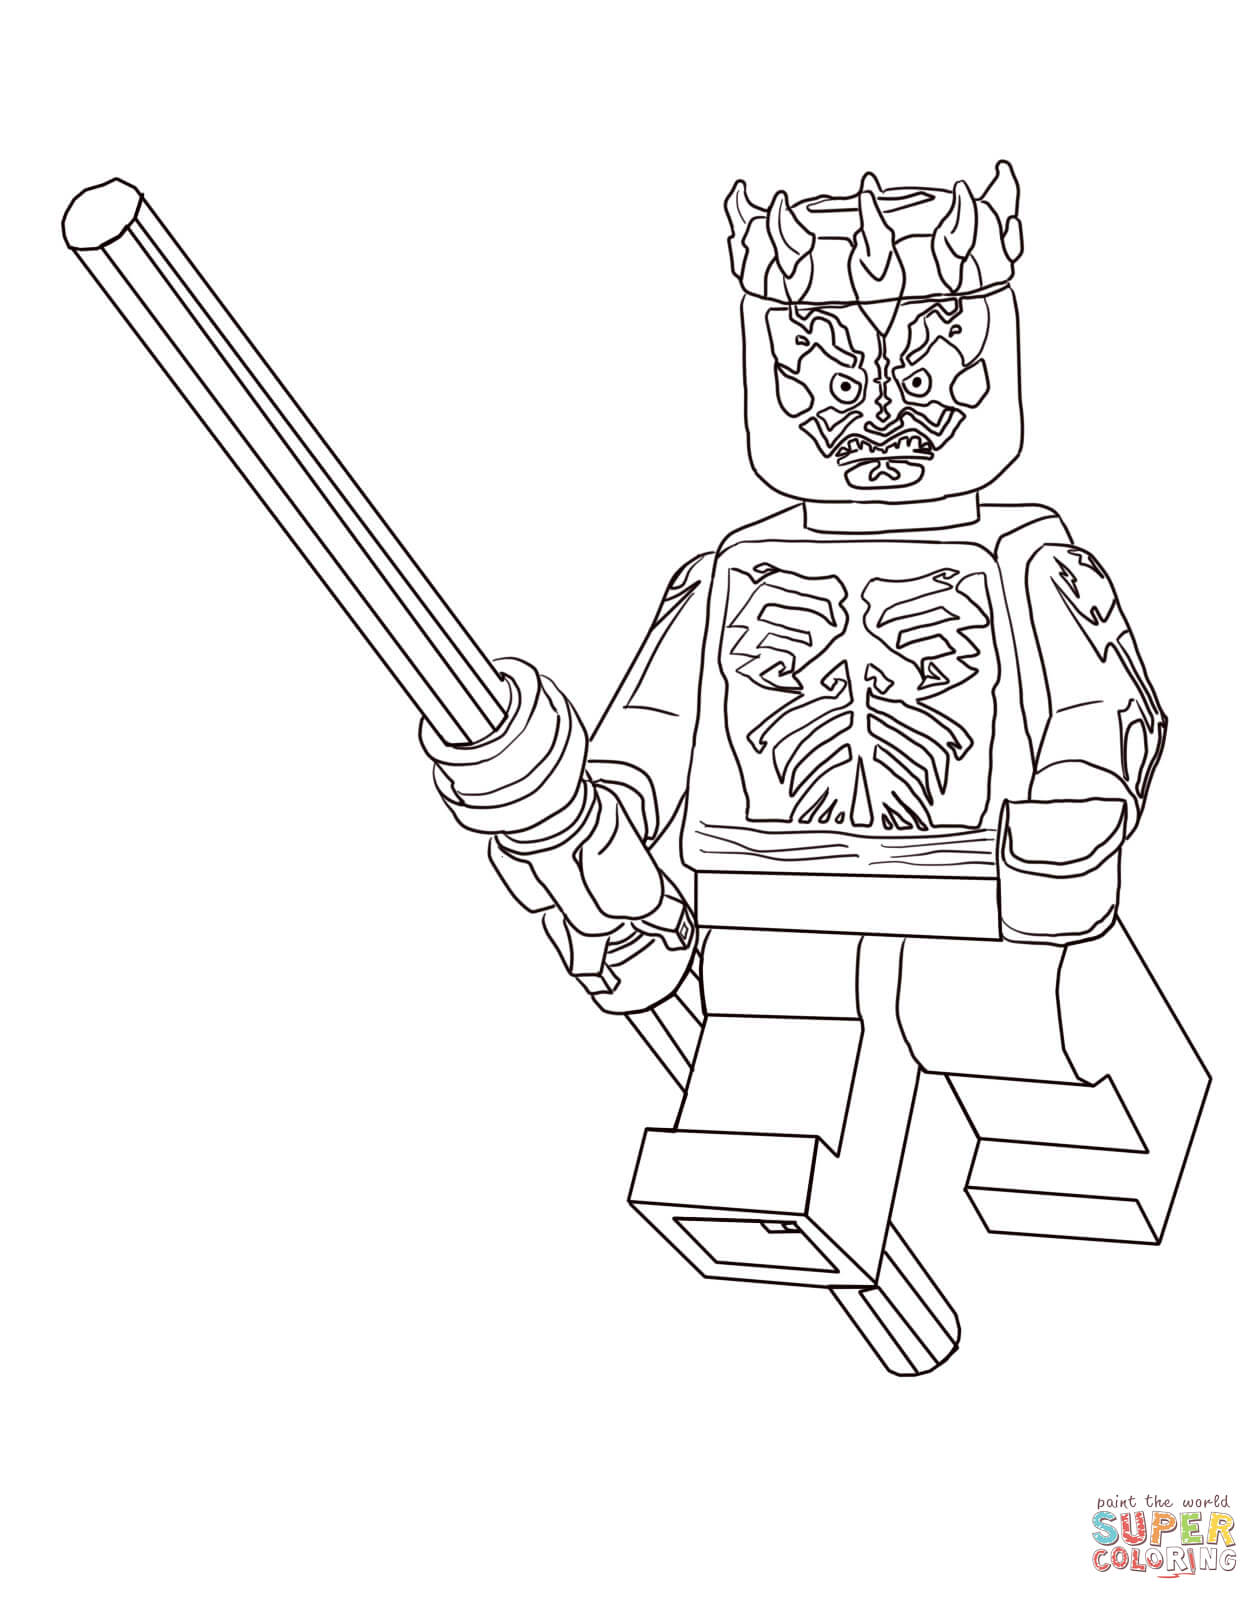 Lego General Grievous coloring page | Free Printable Coloring Pages